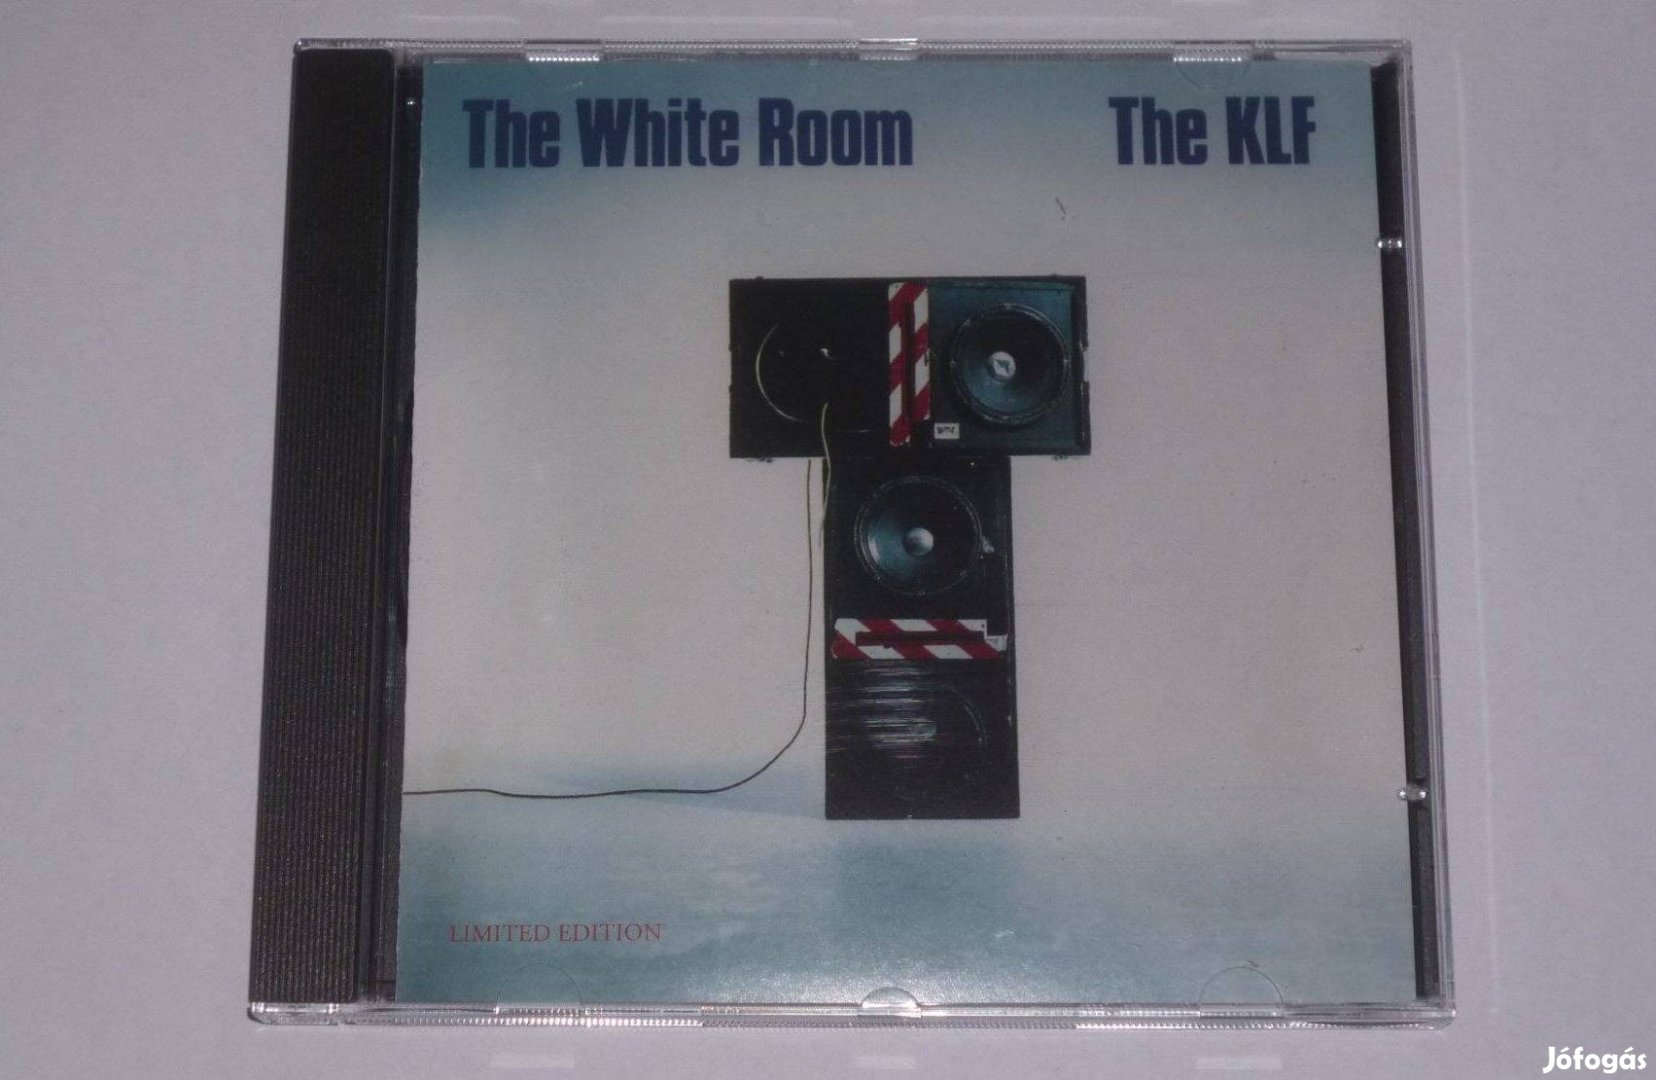 The KLF - The White Room CD Downtempo, House, Techno